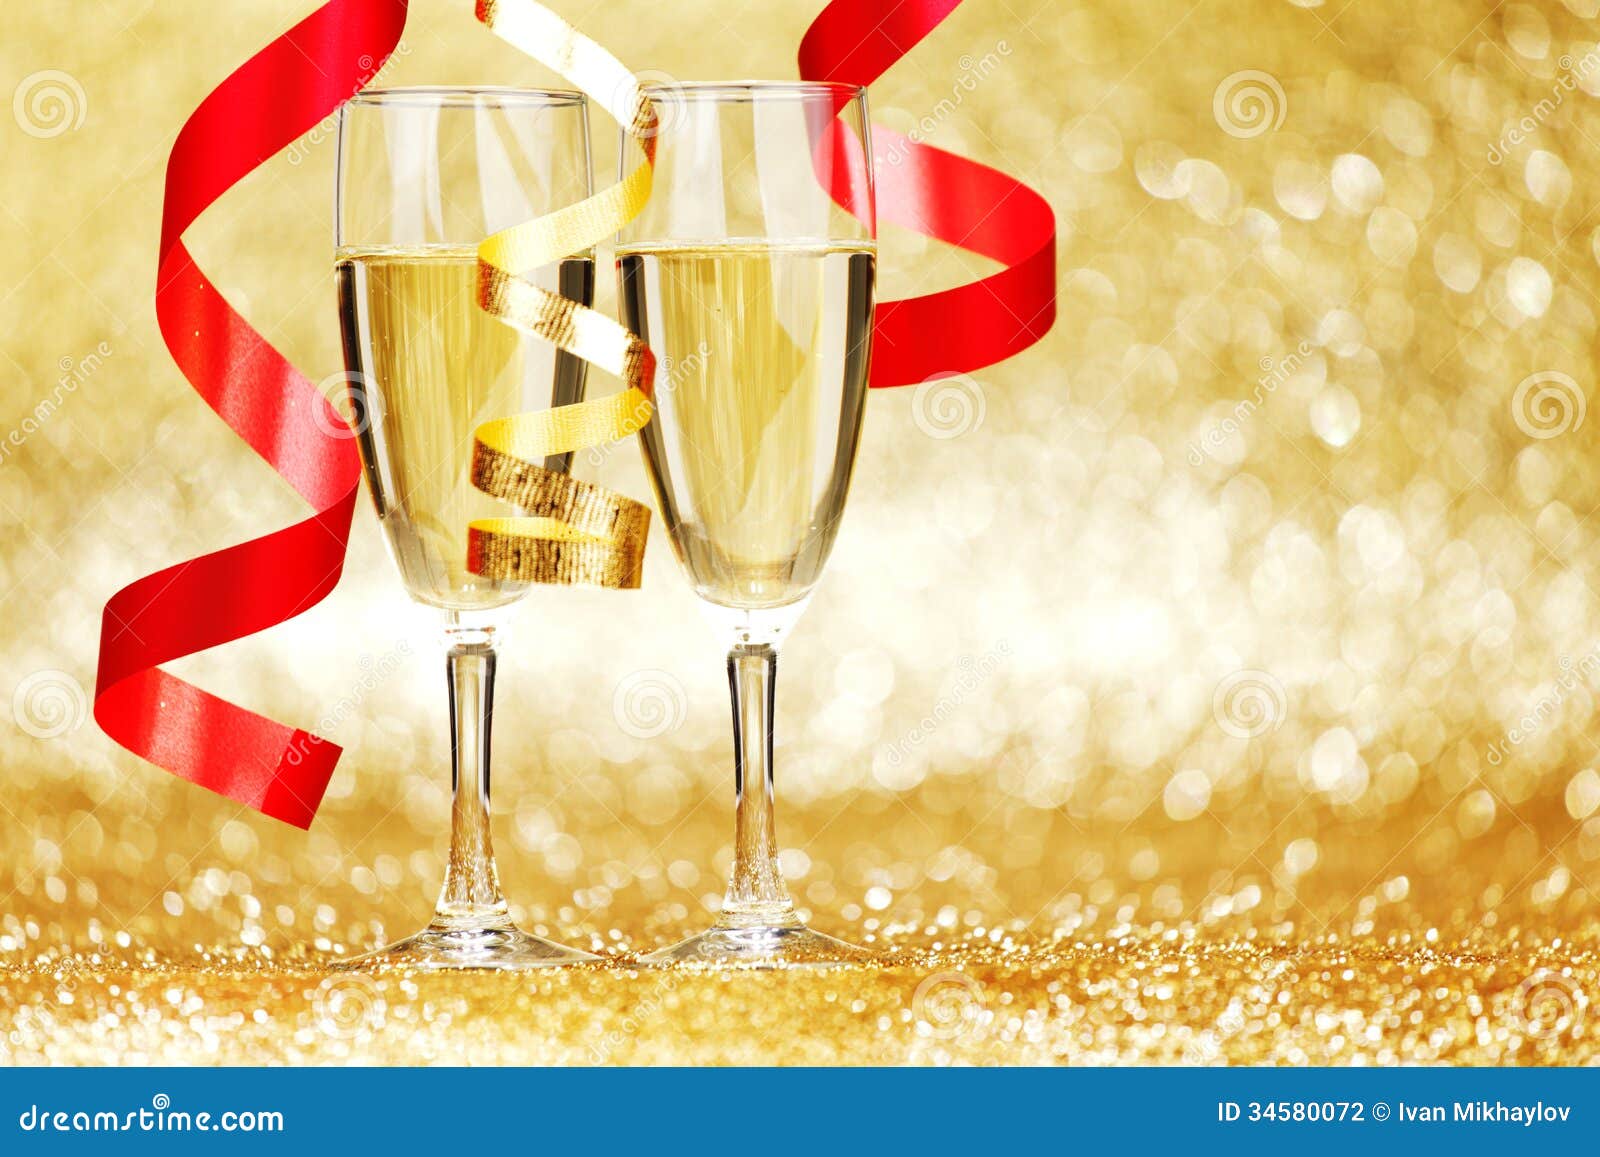 Champagne and ribbons stock photo. Image of romantic - 34580072